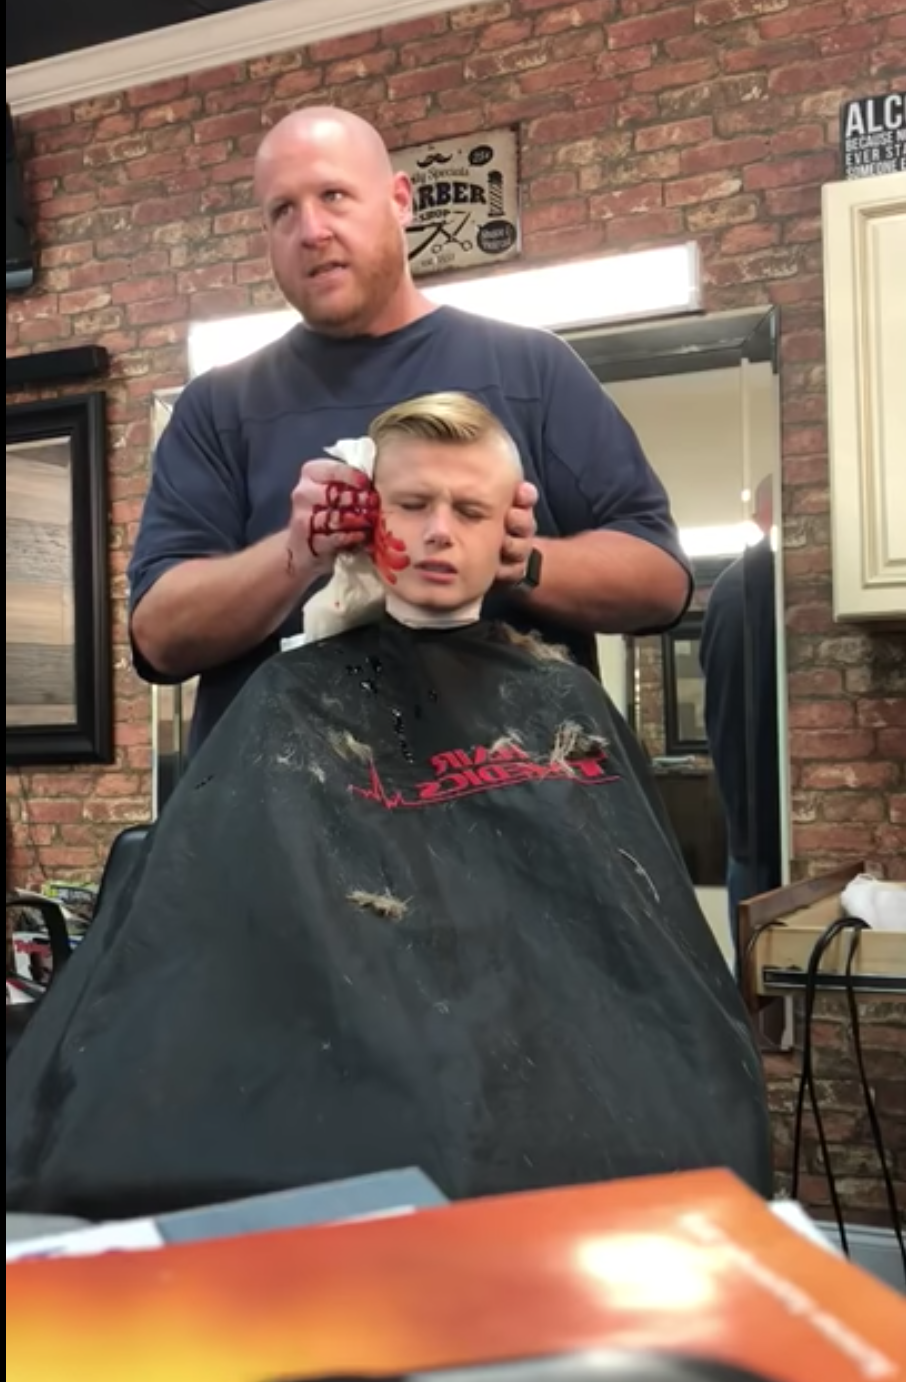 Barber Jude Sannicandro pranked a kid customer by pretending to accidentally cut off his ear. (Photo: YouTube/Jude Sannicandro)